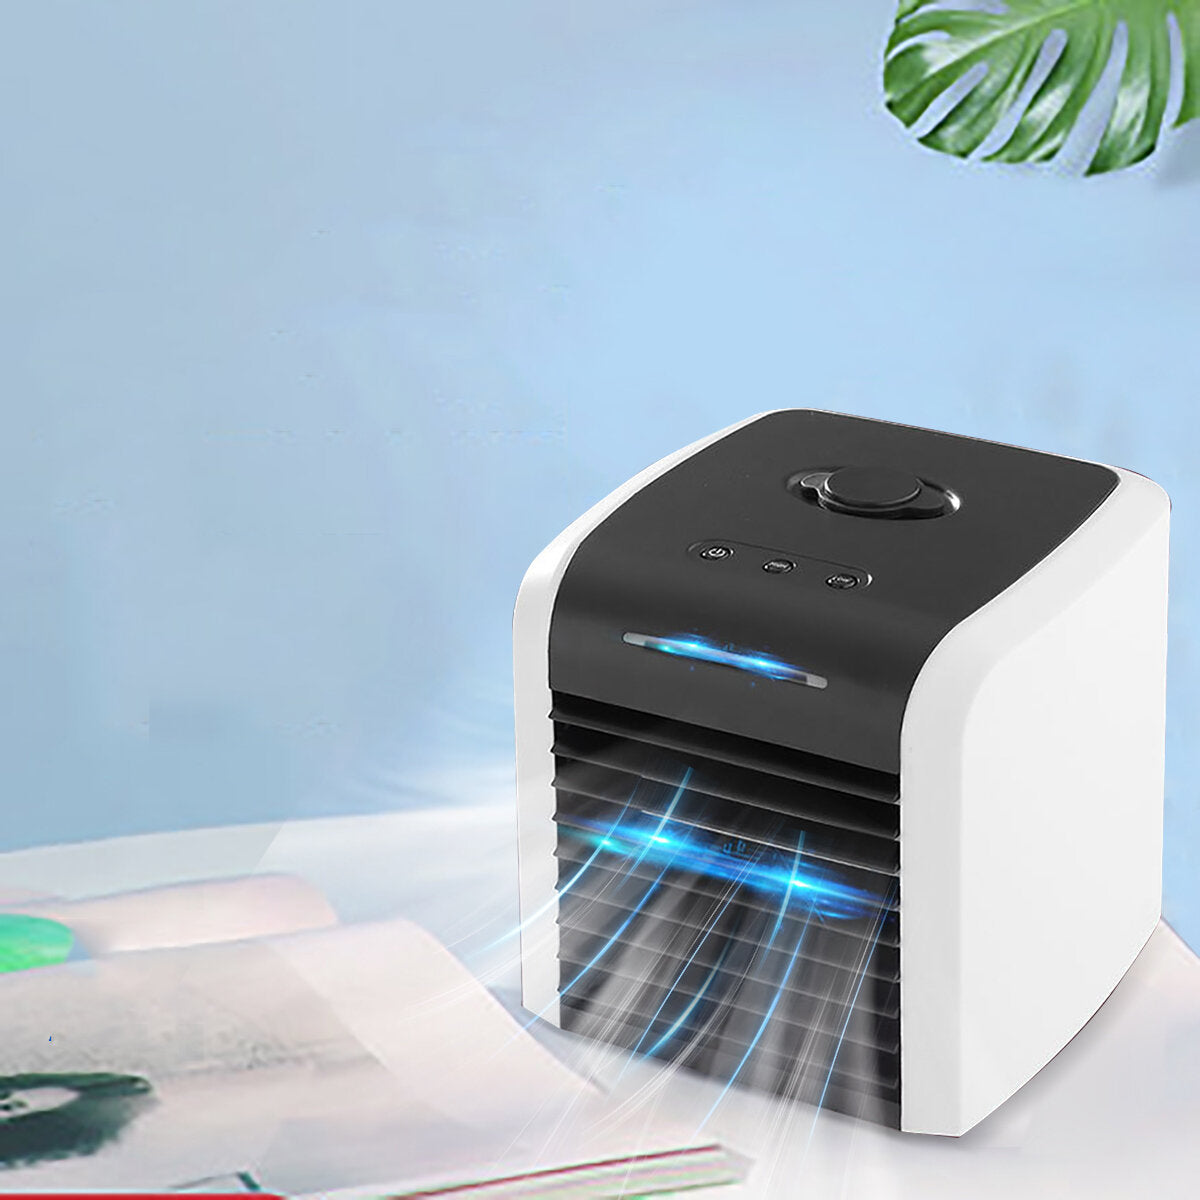 12W Desktop Air Conditioner 2 Gears 90 Adjustable Cooling Fan USB Humidifier Travel Home Office